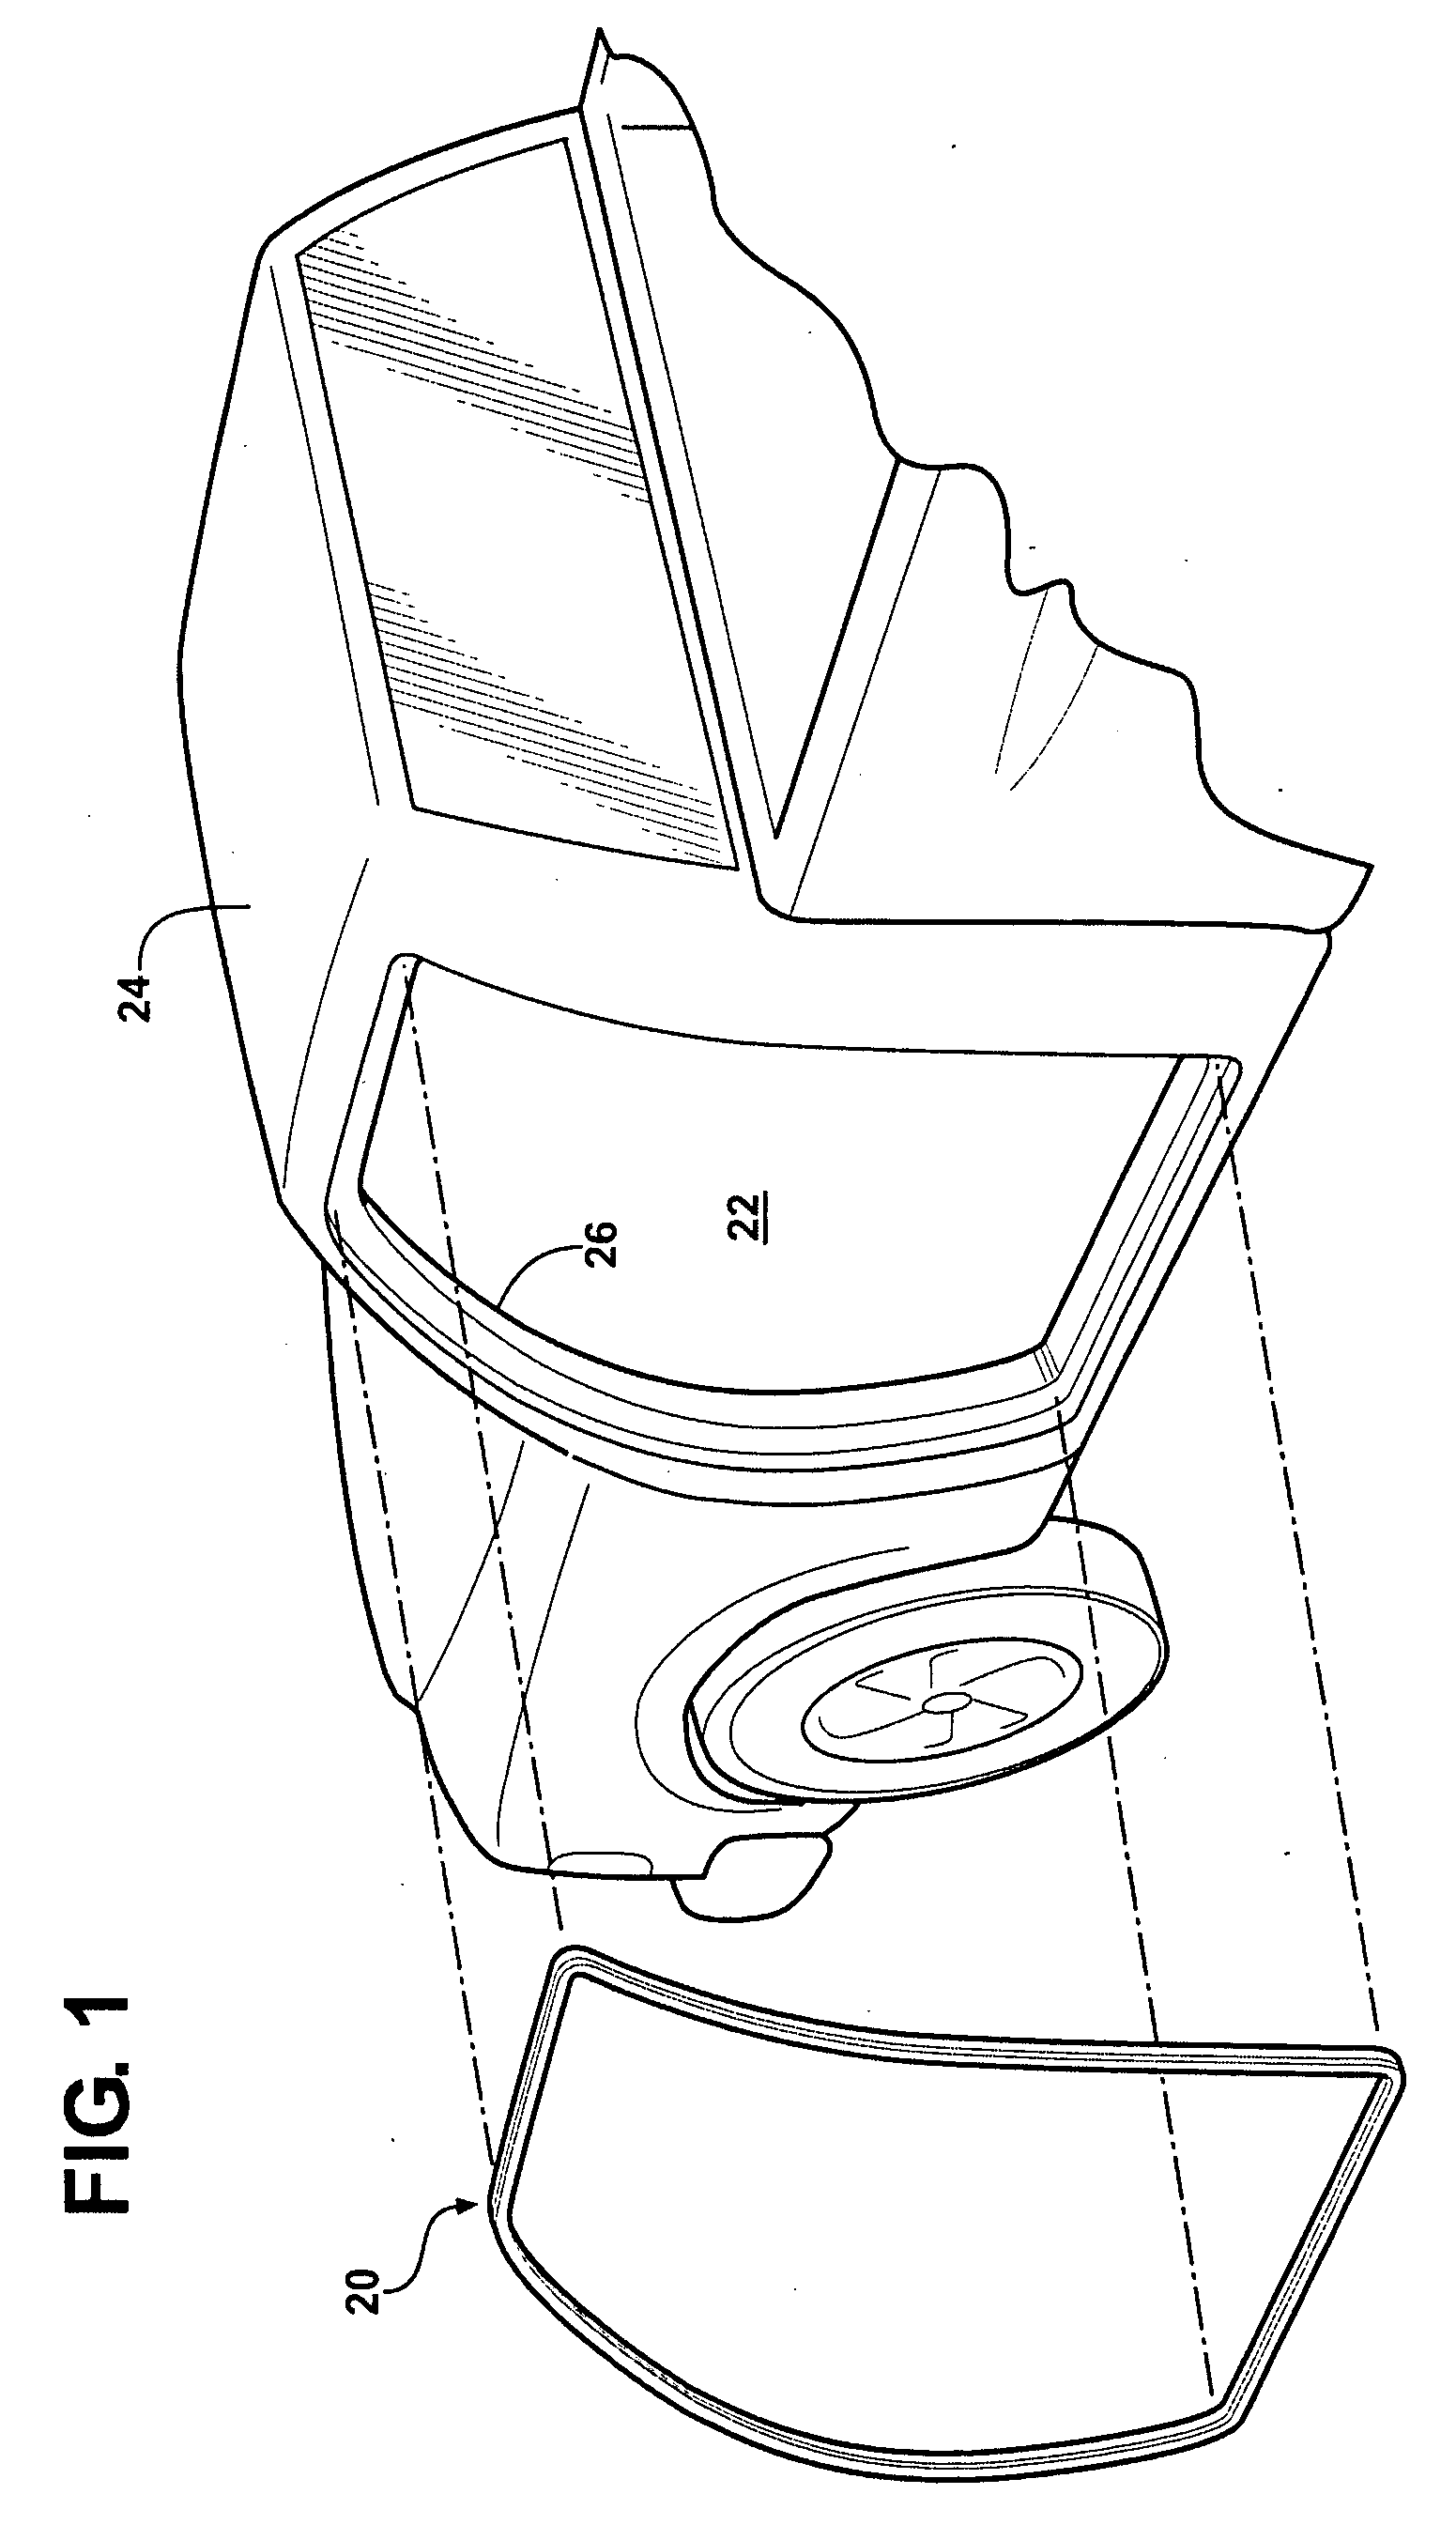 Mechanically stiffened weatherseal carrier